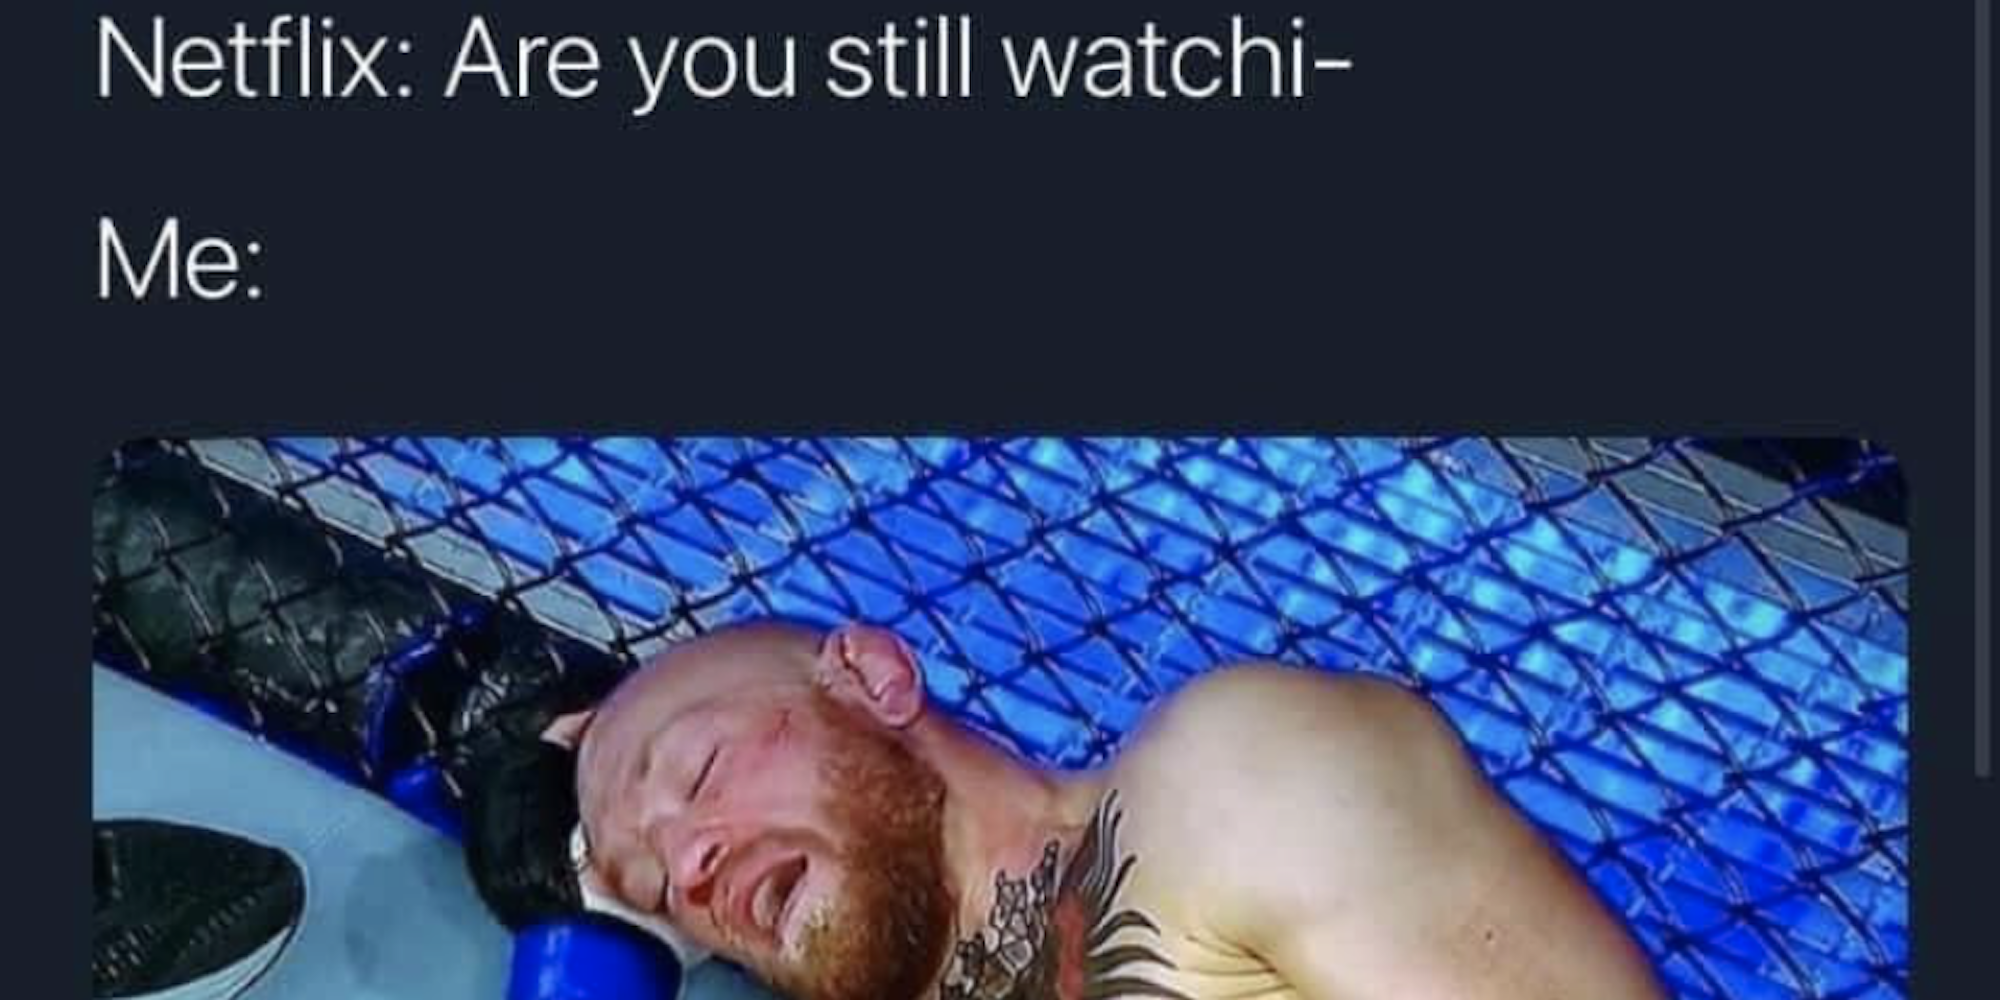 "Netflix: are you still watching Me:" Connor McGregor's unconscious face and shoulders